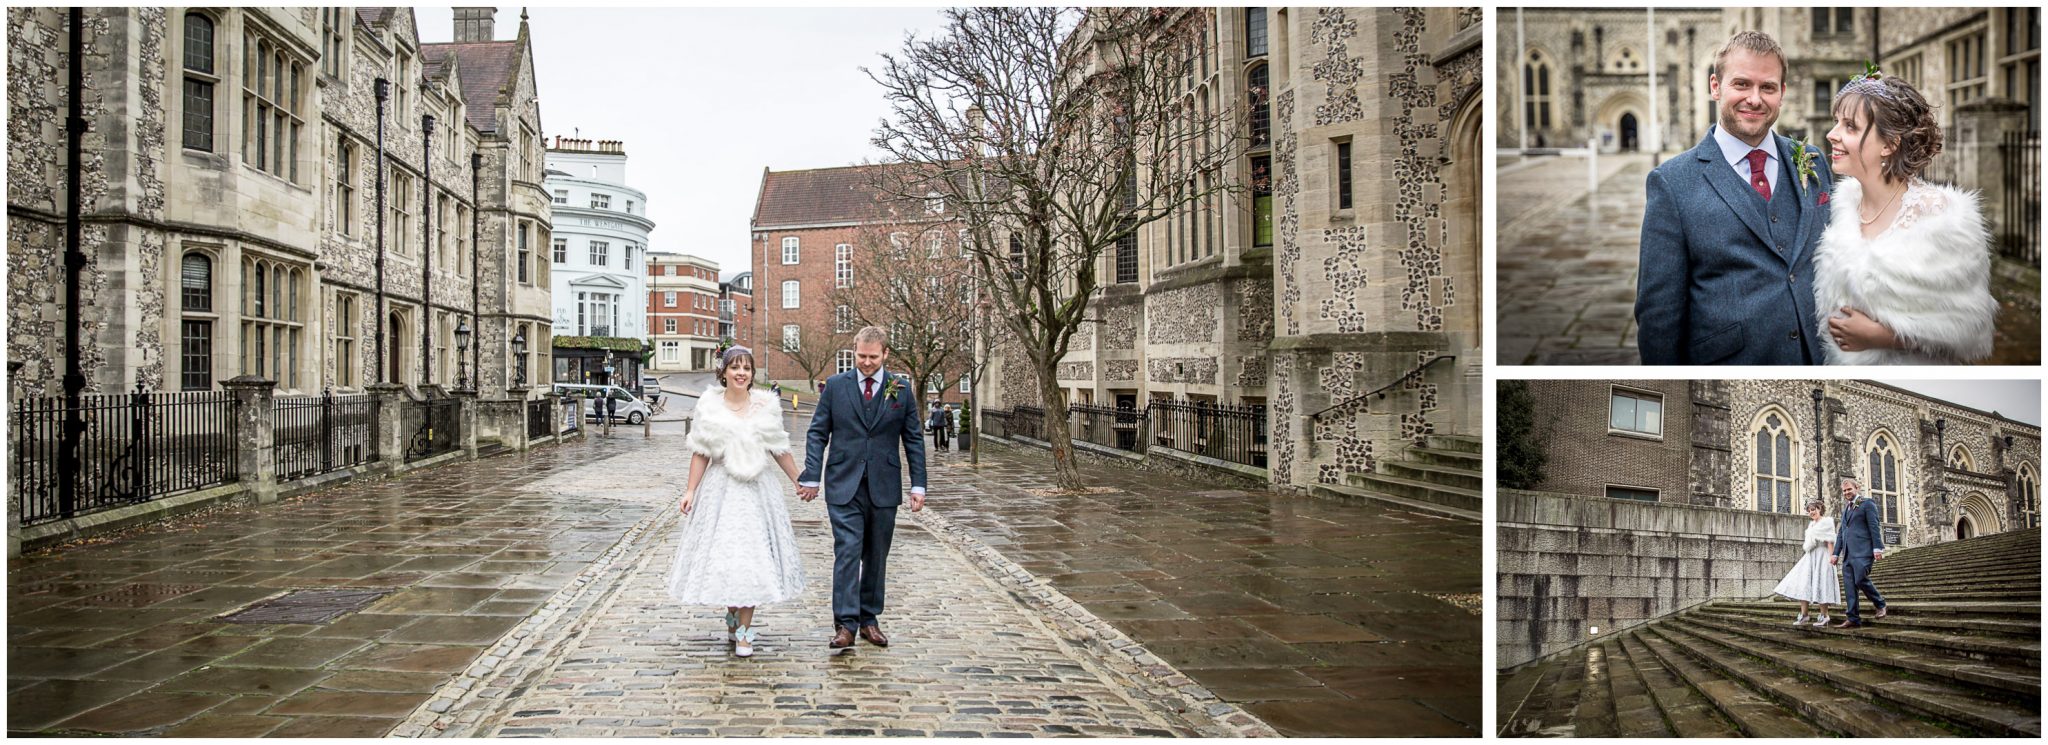 Castle Room Winchester wedding photography bride and groom on castle avenue